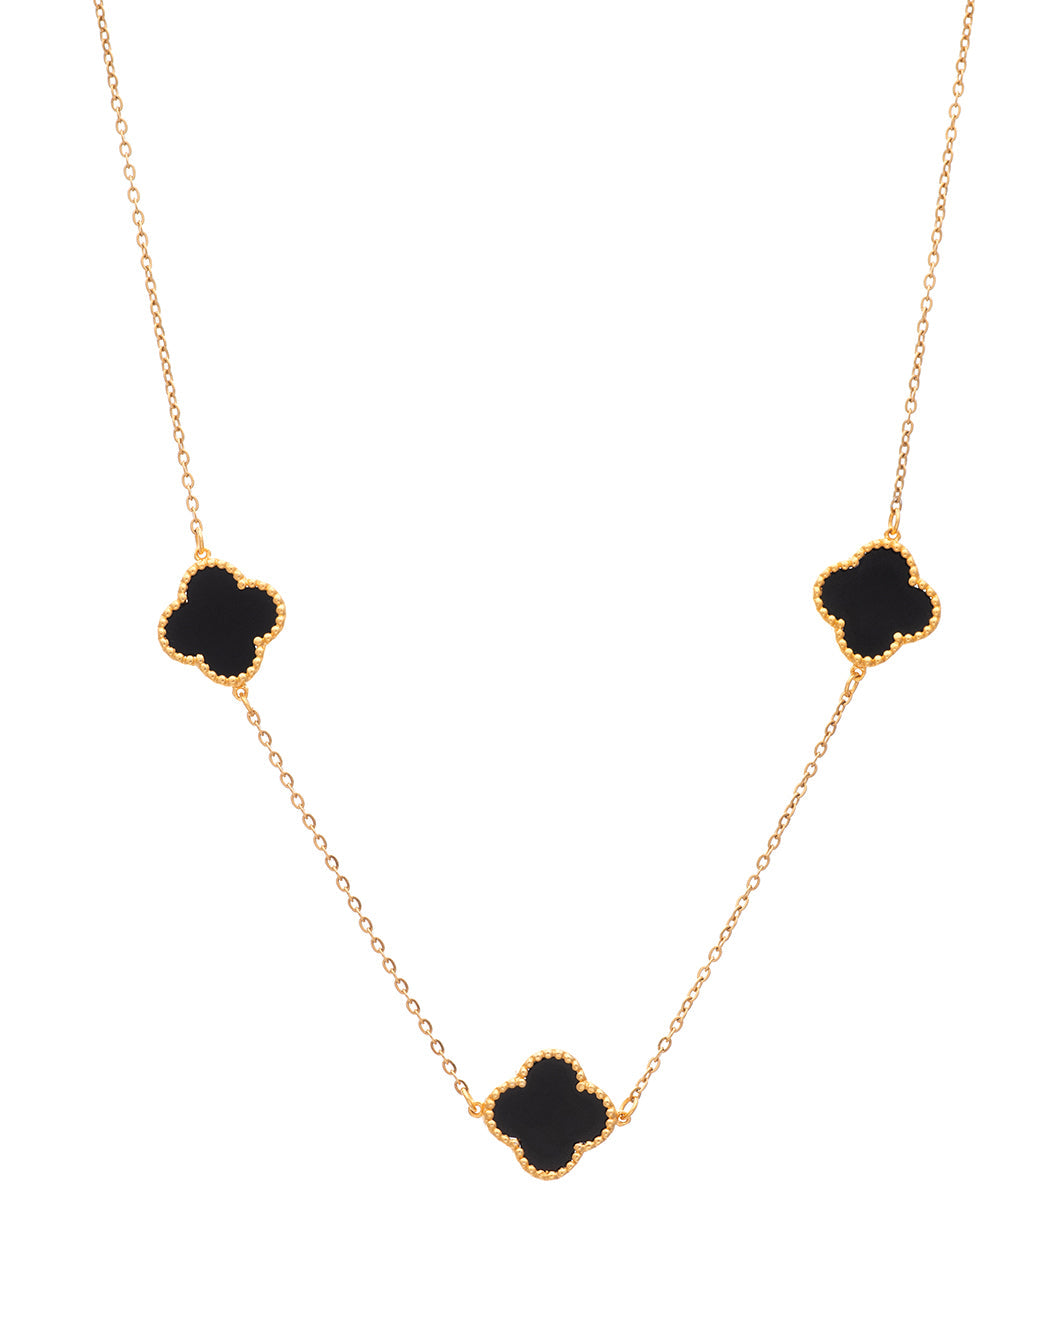 Three Royal Flower necklace